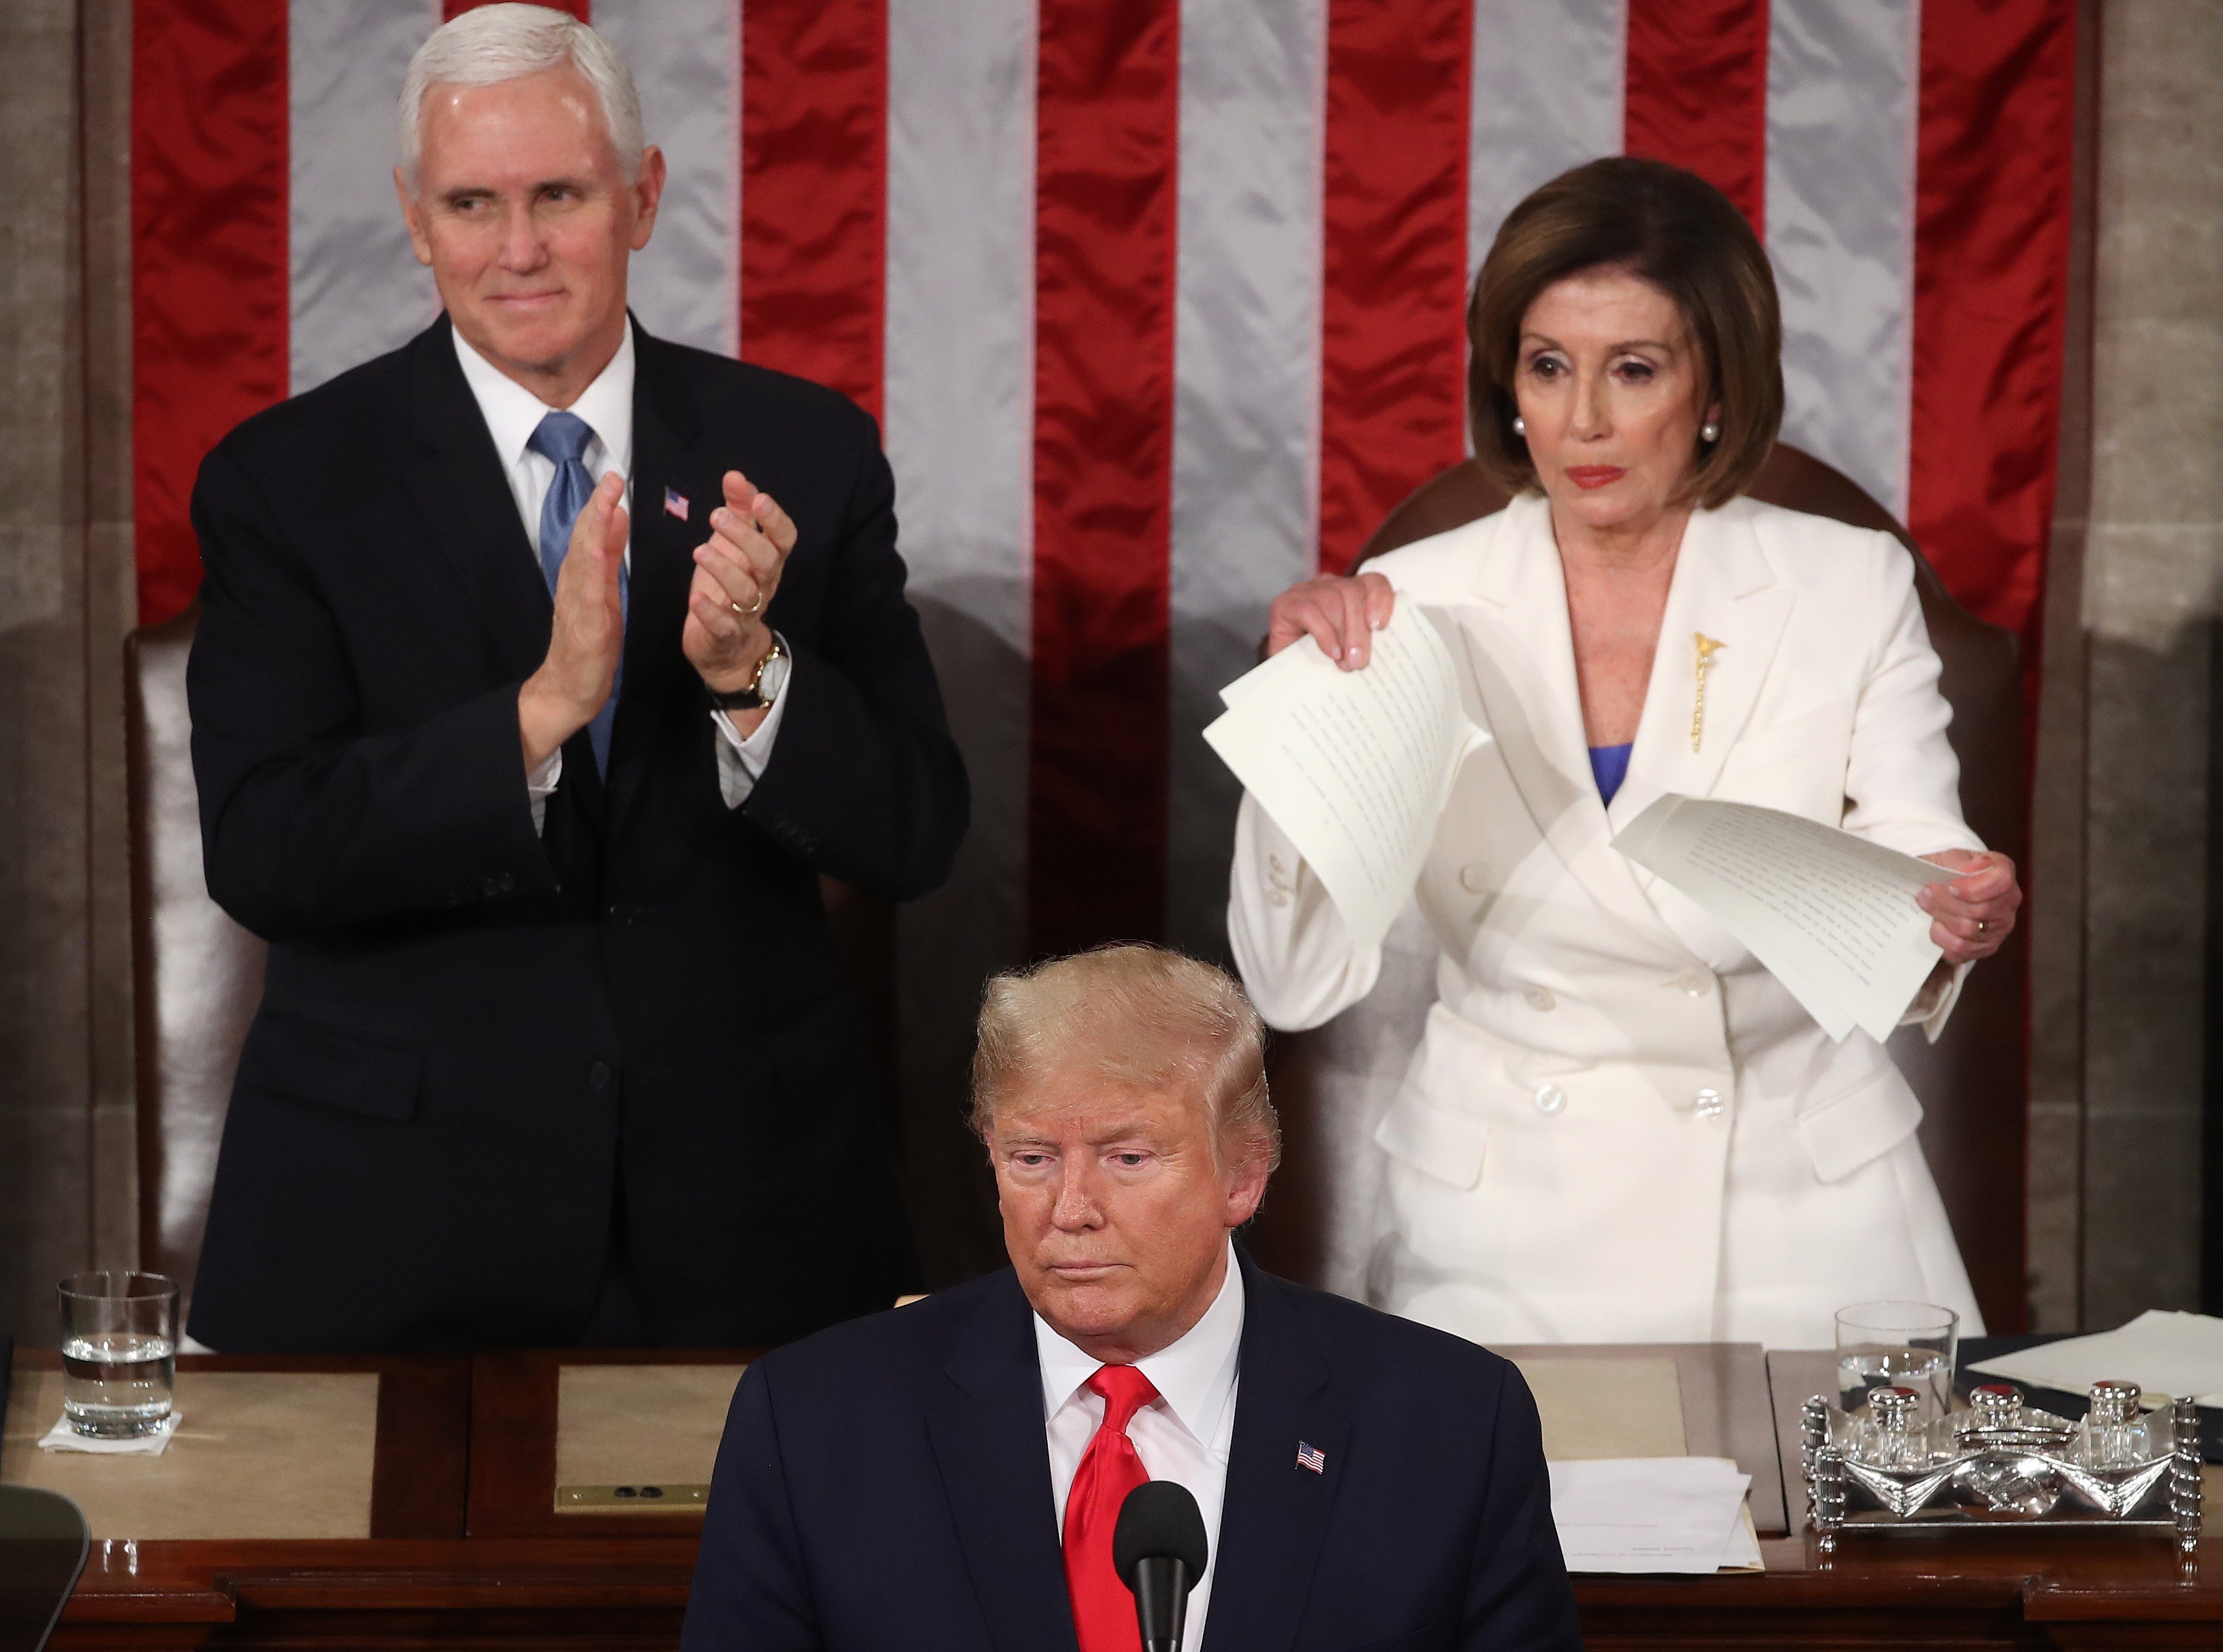 House Speaker Nancy Pelosi tears up her copy of President Trump’s state-of-the-nation speech on February 4, in a “courteous” expression of disapproval. Photo: AFP